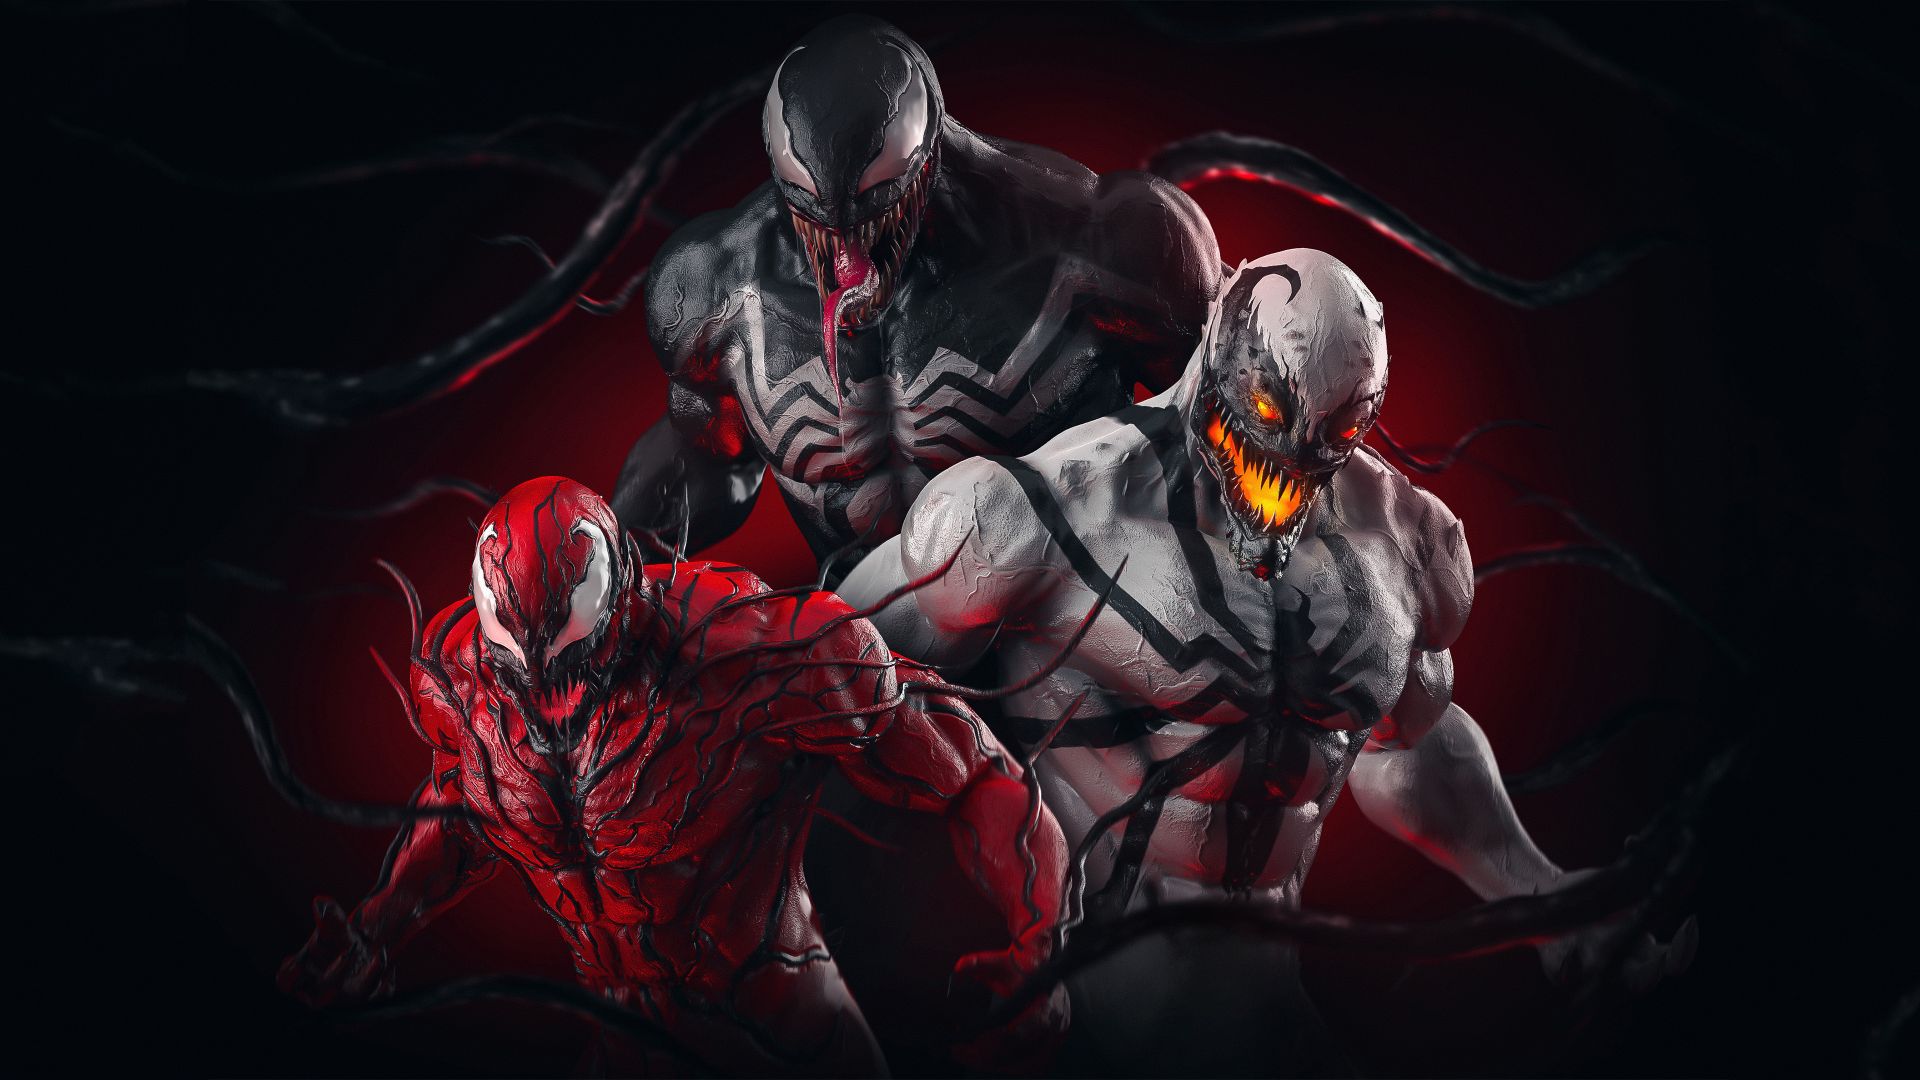 Free Venom Let There Be Carnage Wallpaper Downloads 100 Venom Let There  Be Carnage Wallpapers for FREE  Wallpaperscom